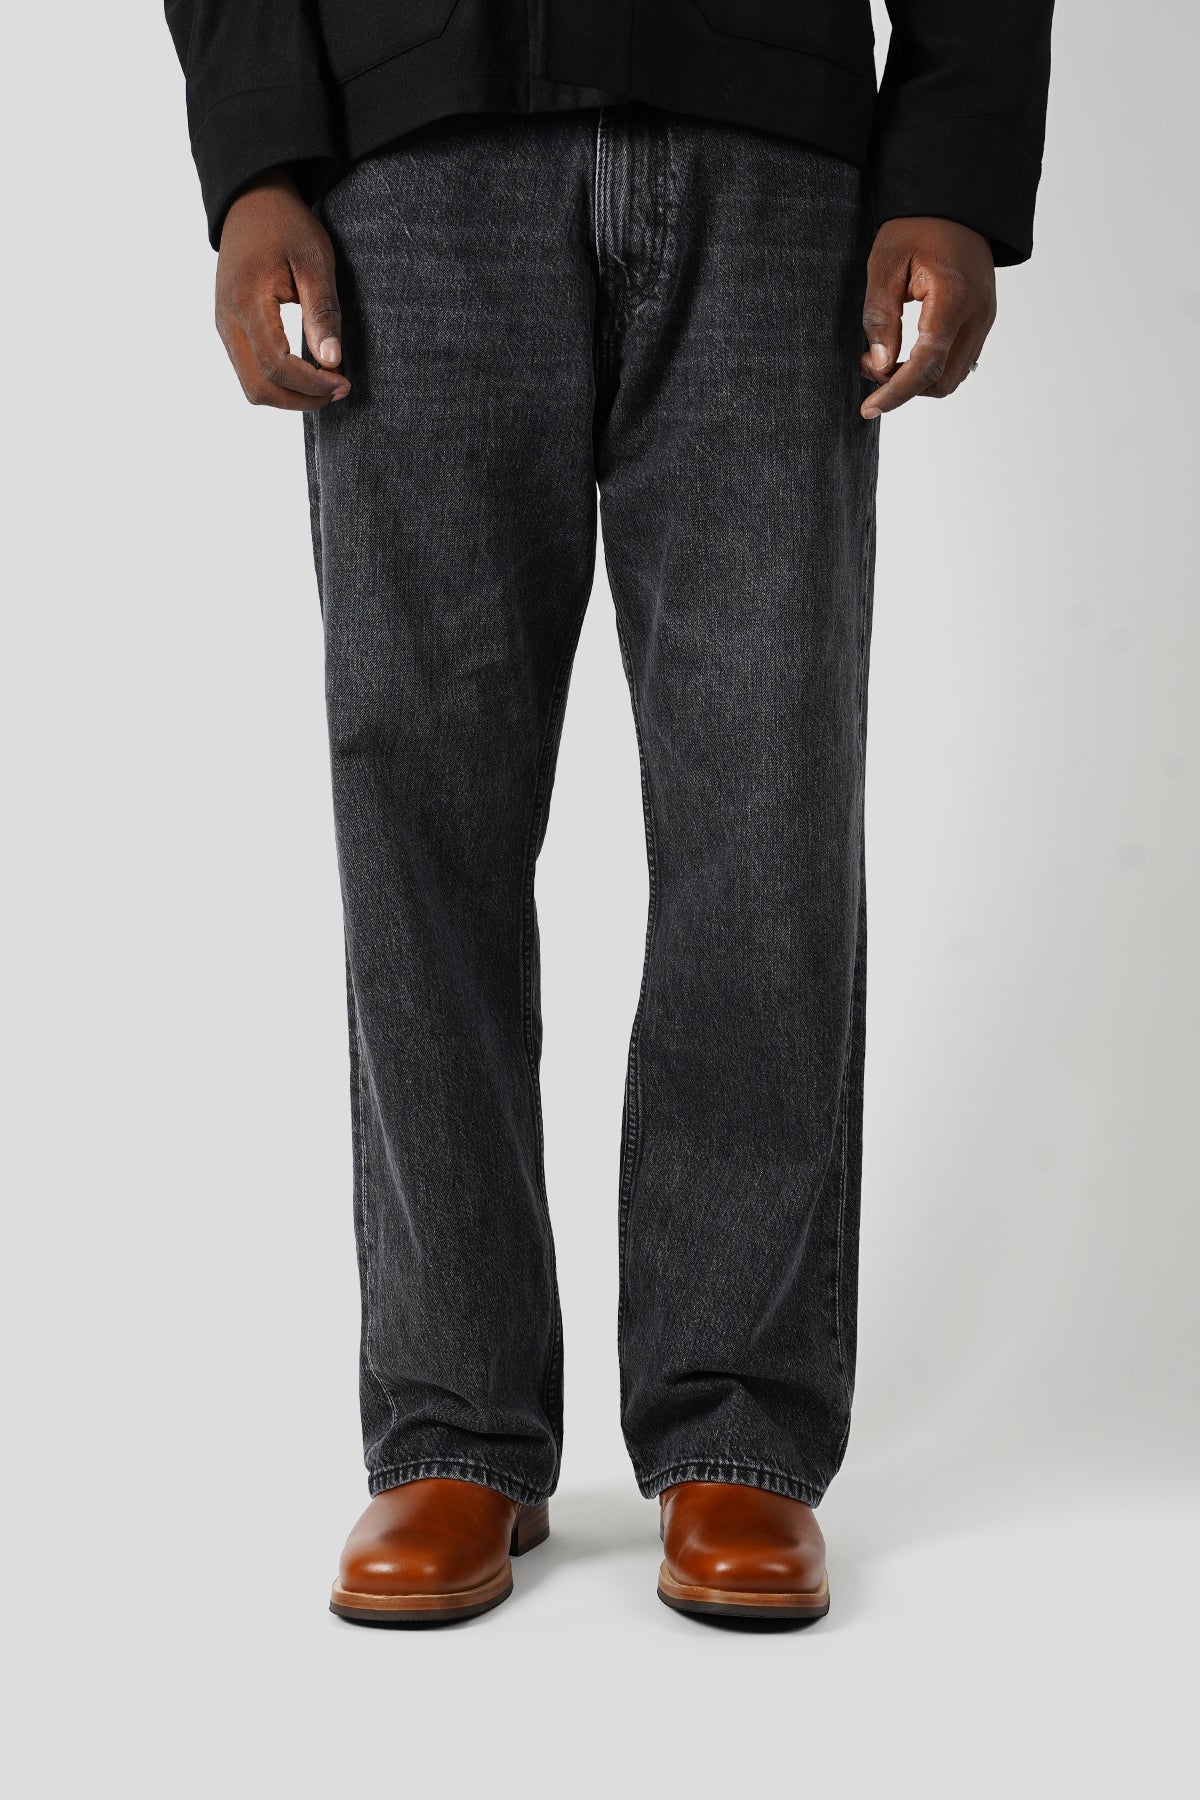 Our Legacy - JEAN THIRD CUT SUPERGREY WASH - LE LABO STORE